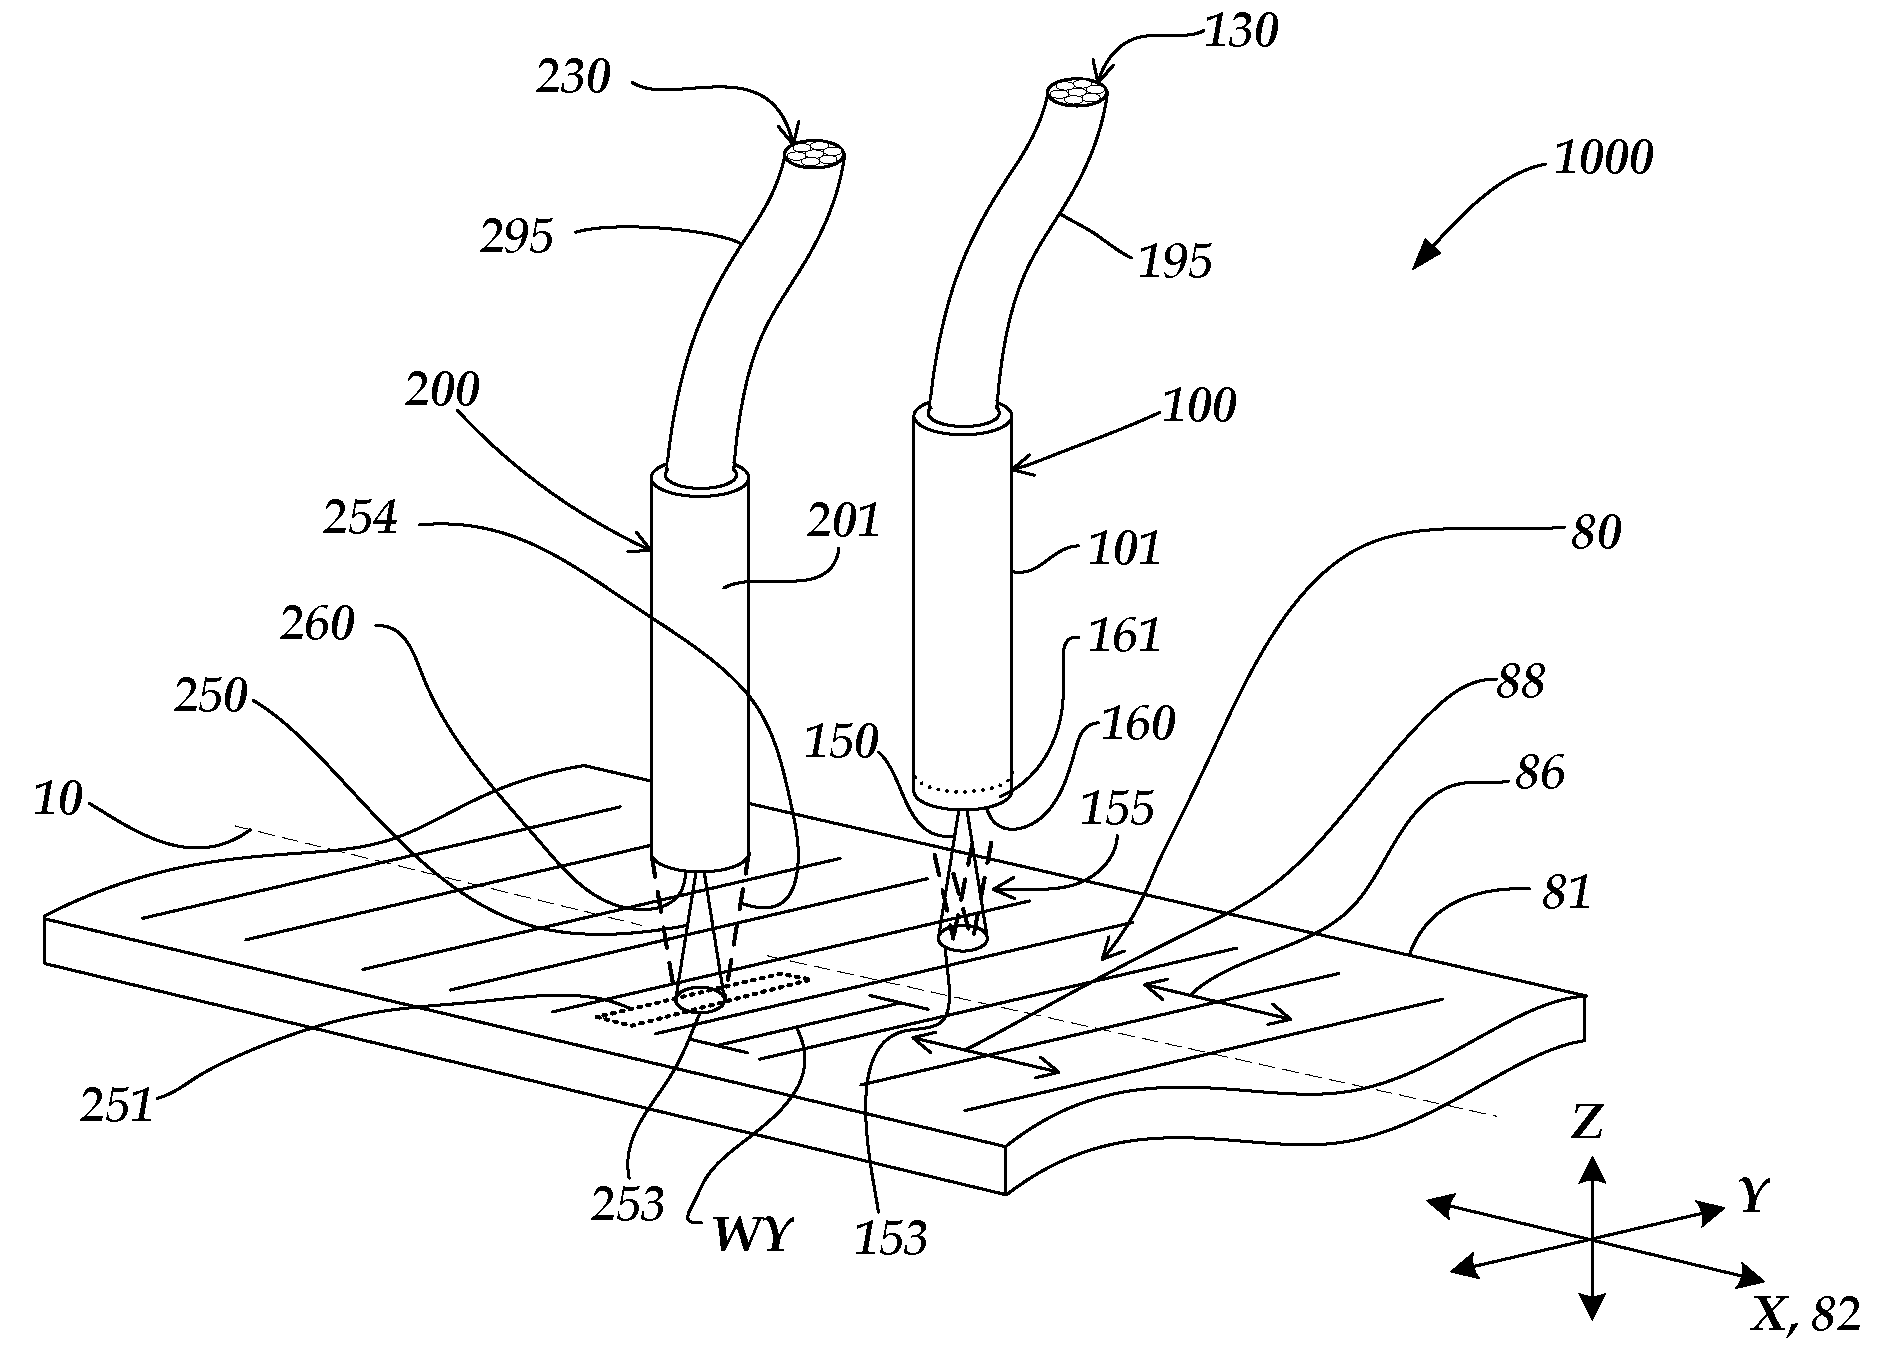 Reference signal generating configuration for an interferometric miniature grating encoder readhead using fiber optic receiver channels